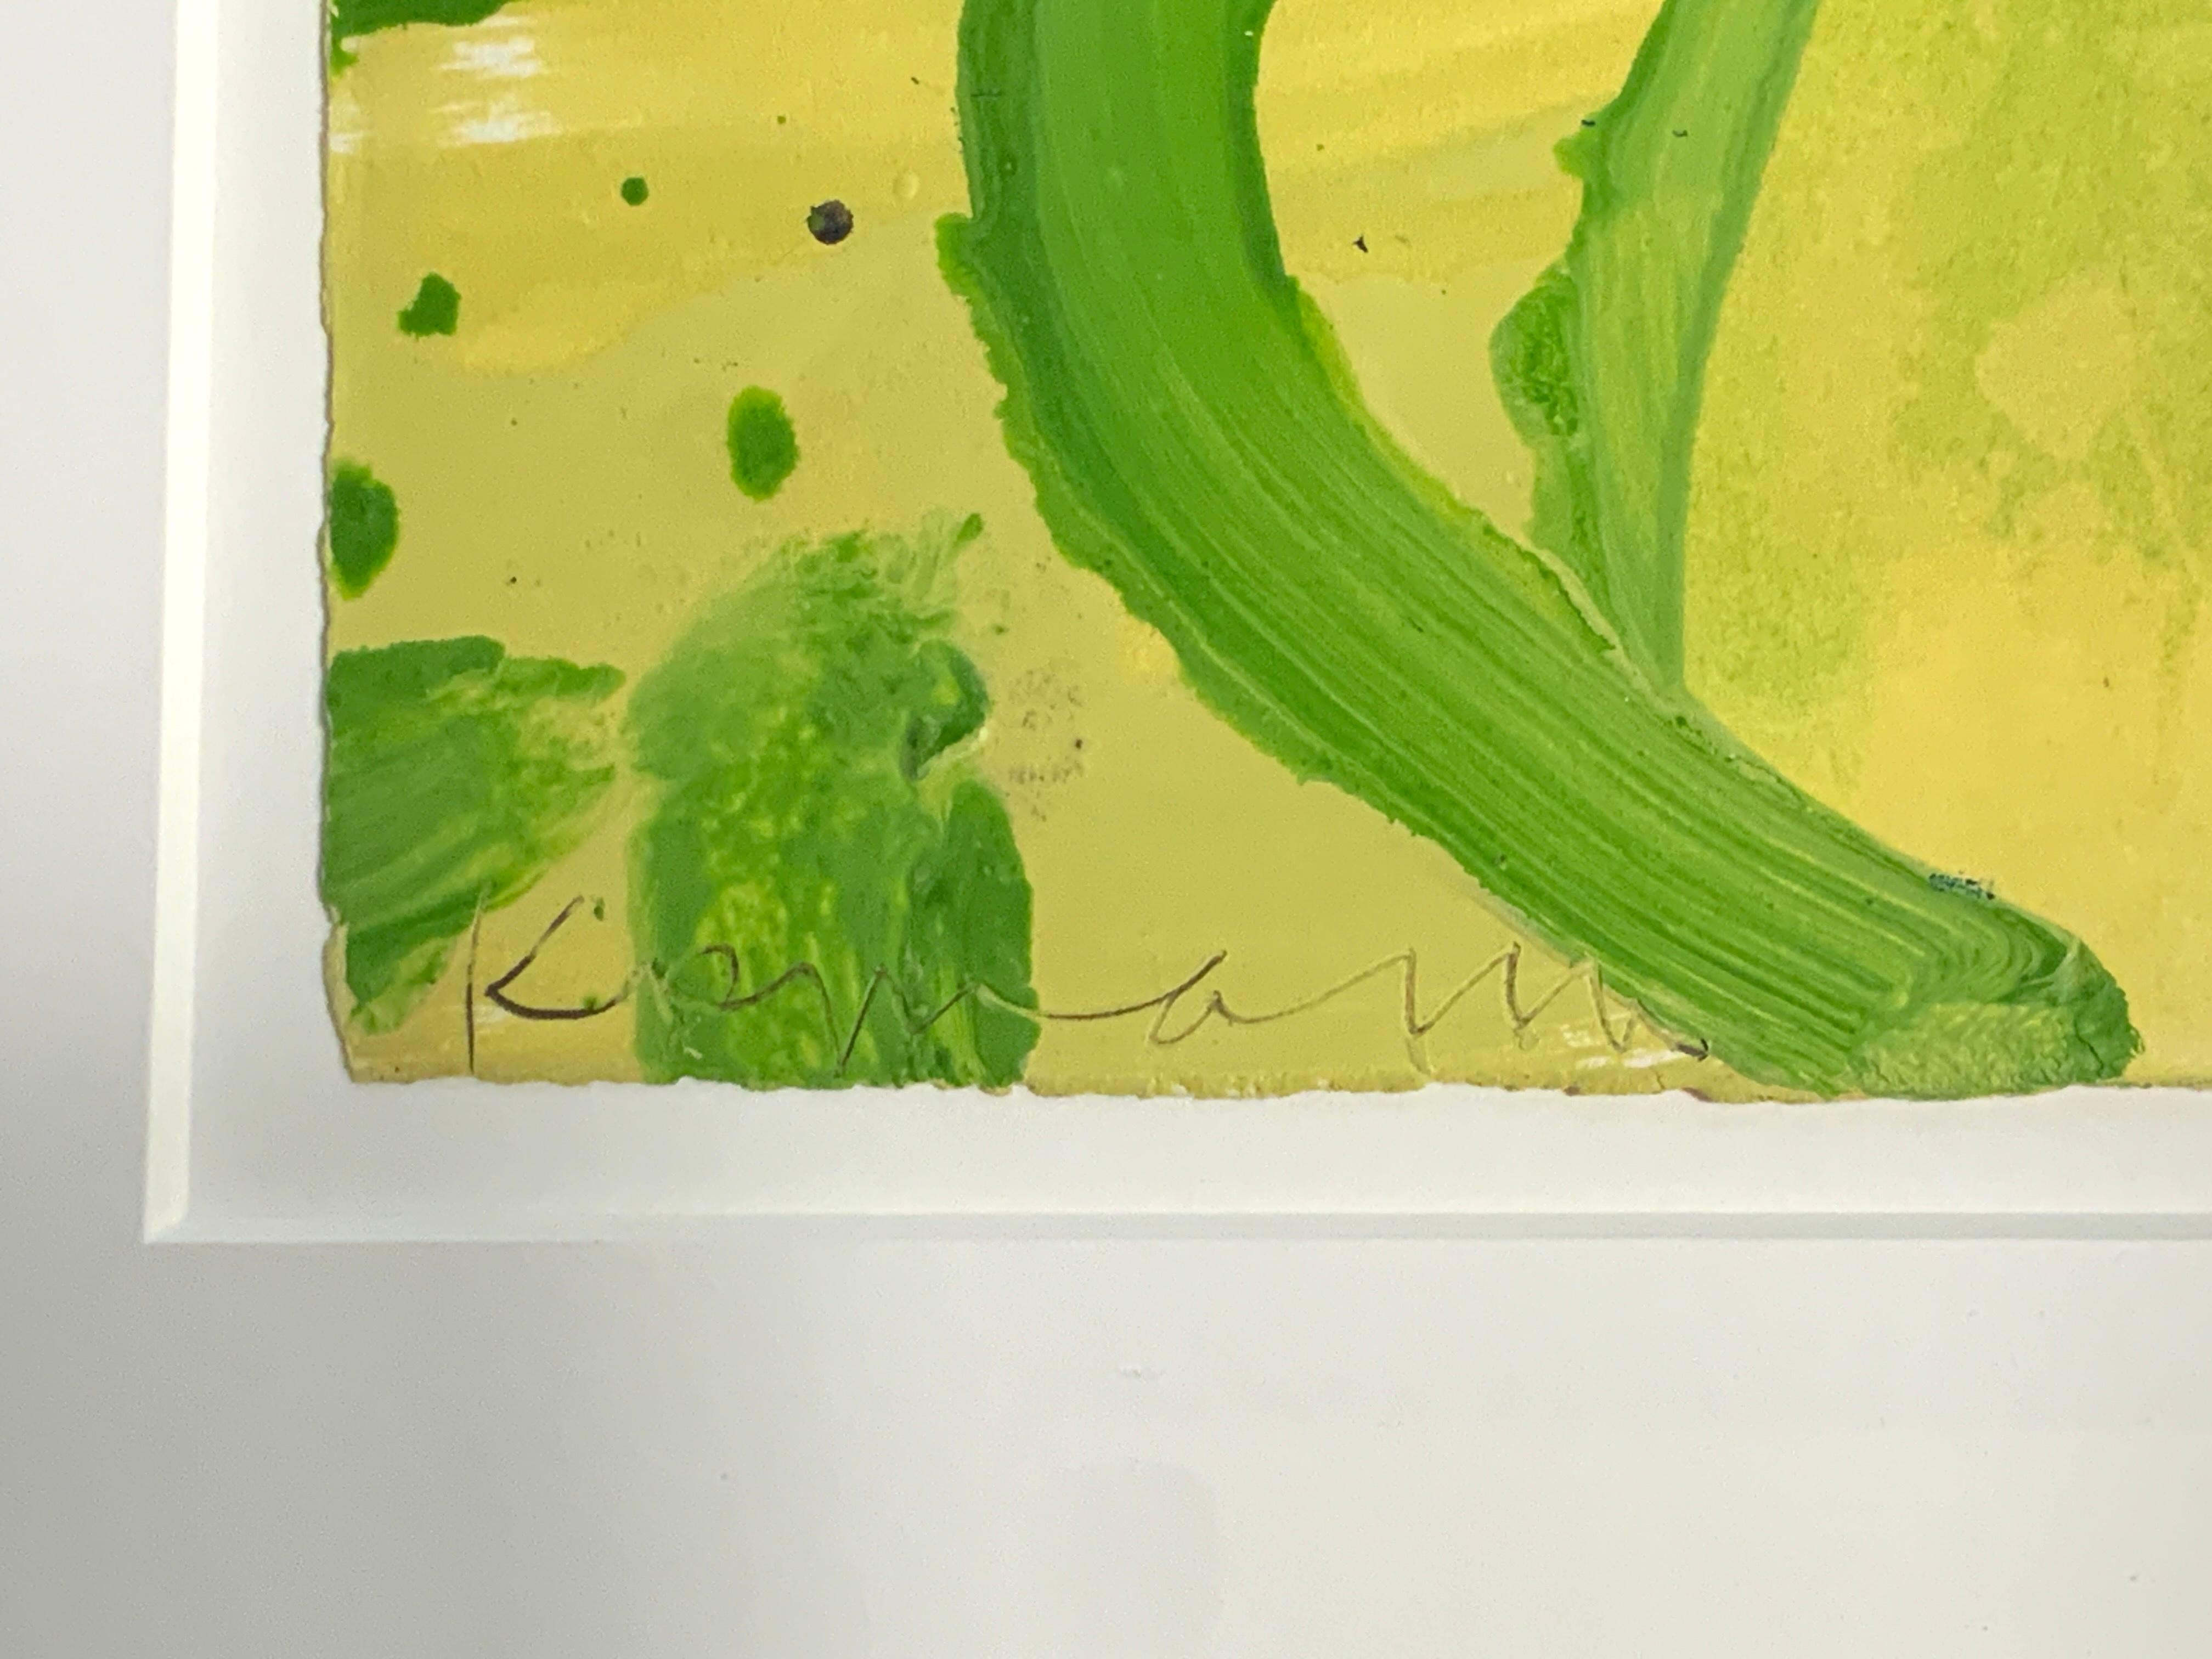 Contemporary Gary Komarin “Untitled Green Vessel on Yellow Green”, acrylic on paper, 2000 For Sale